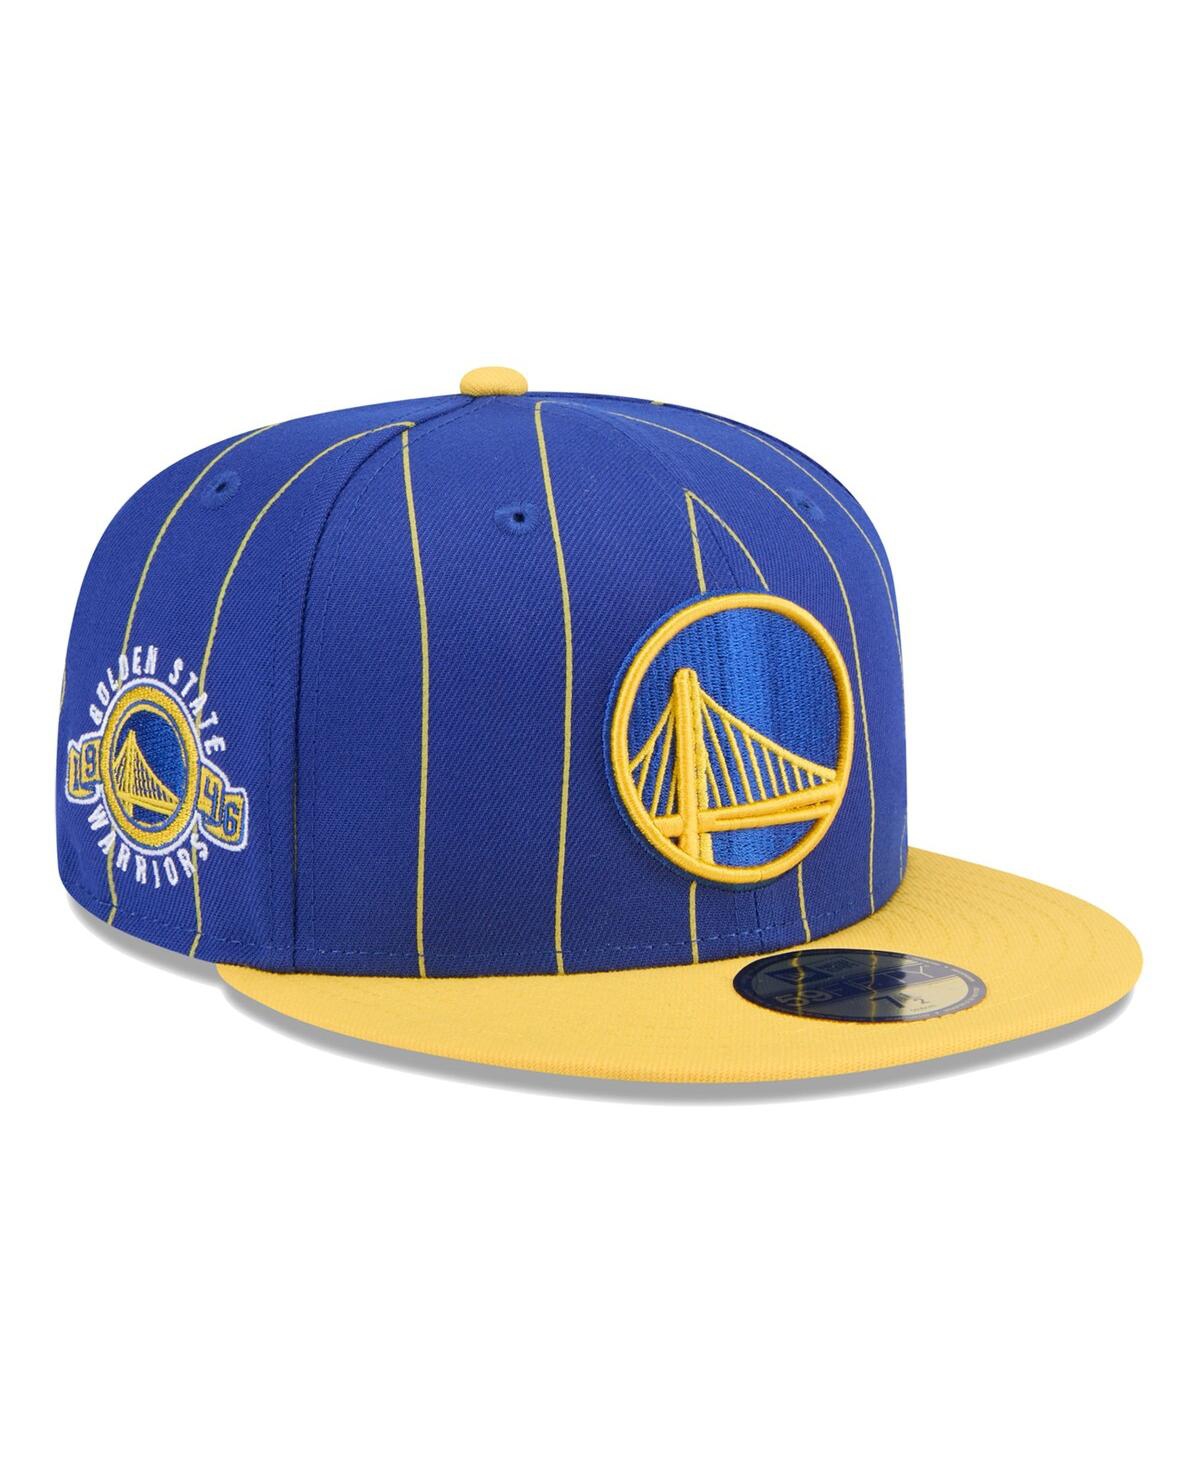 Men's Royal/Gold Golden State Warriors Pinstripe Two-Tone 59Fifty Fitted Hat - Royal Gold